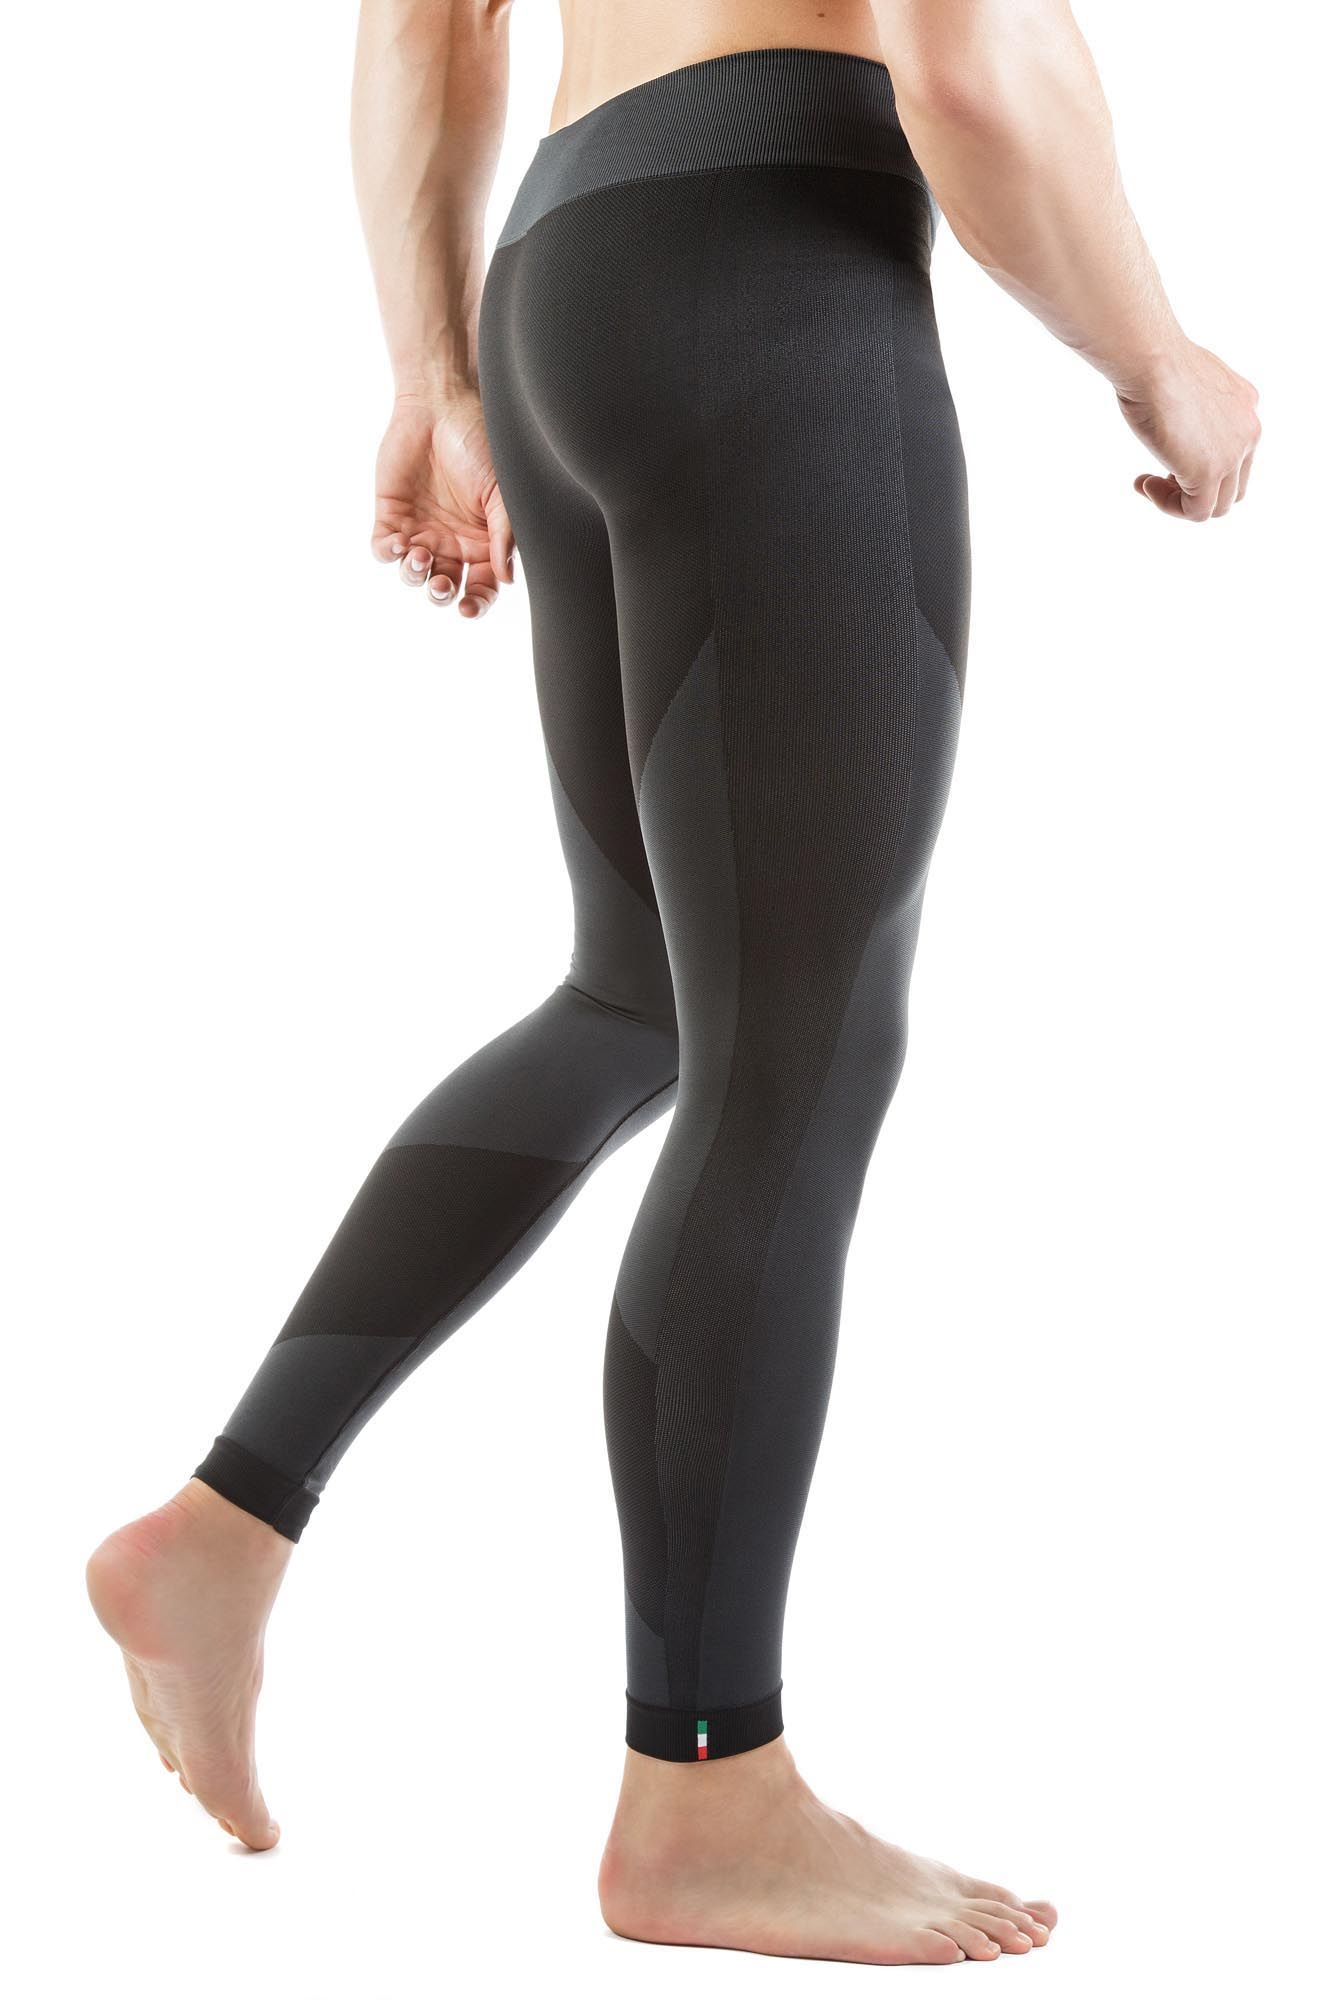 A Better Life Exists Active compression leggings in gray